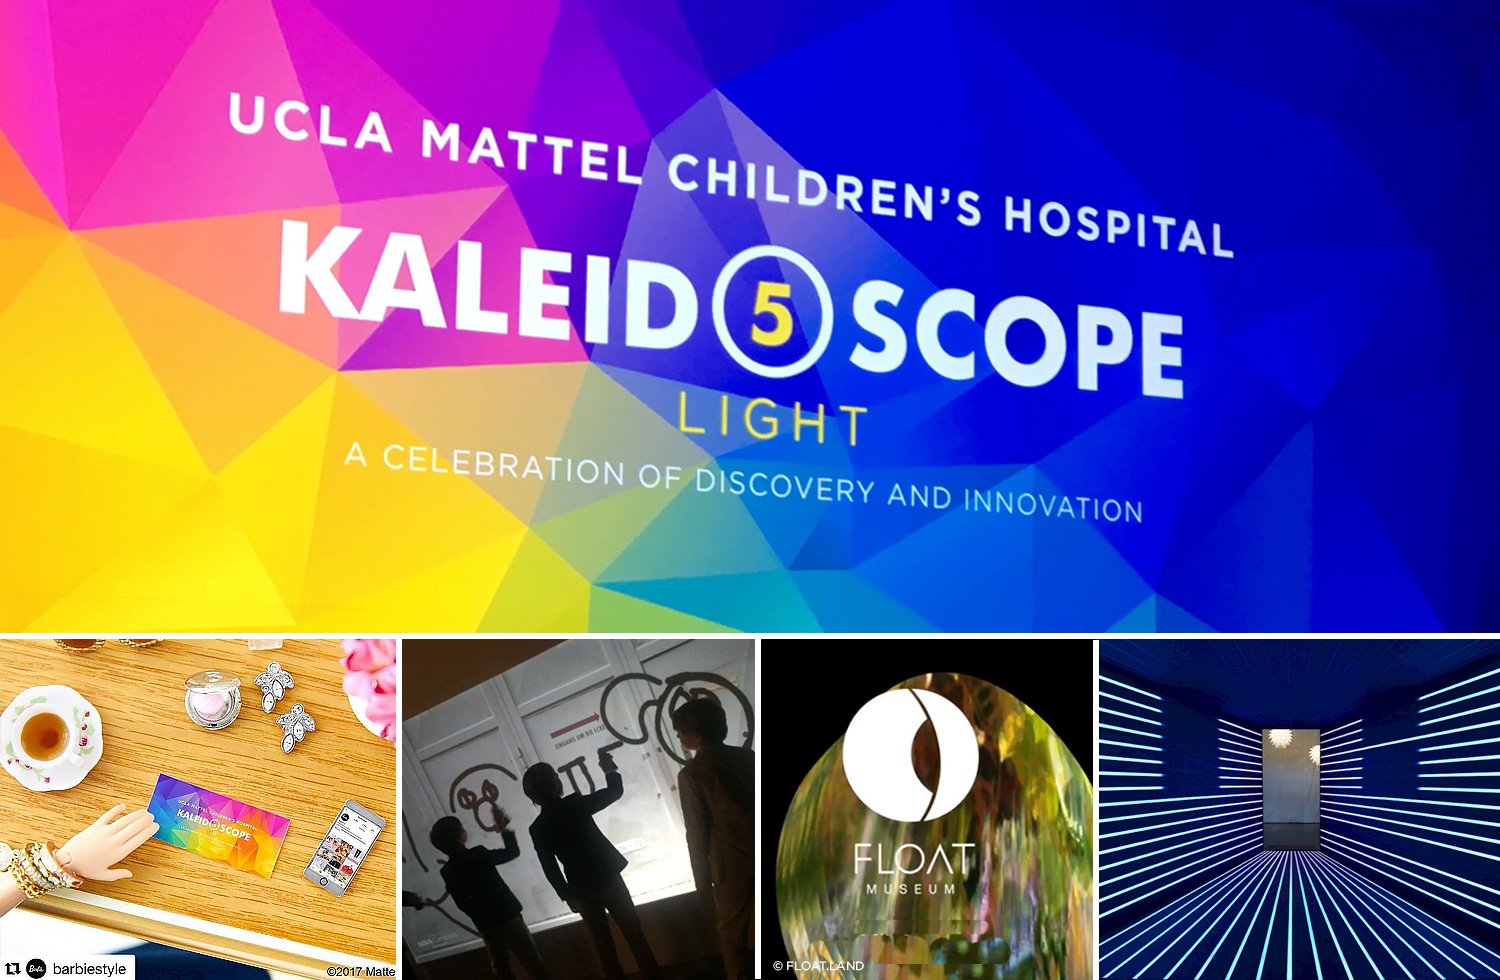  Kaleidoscope 5 / UCLA Mattel Children's Hospital Benefit; Identity, collateral, event design &amp; assistance in curation of multiple art installations. 